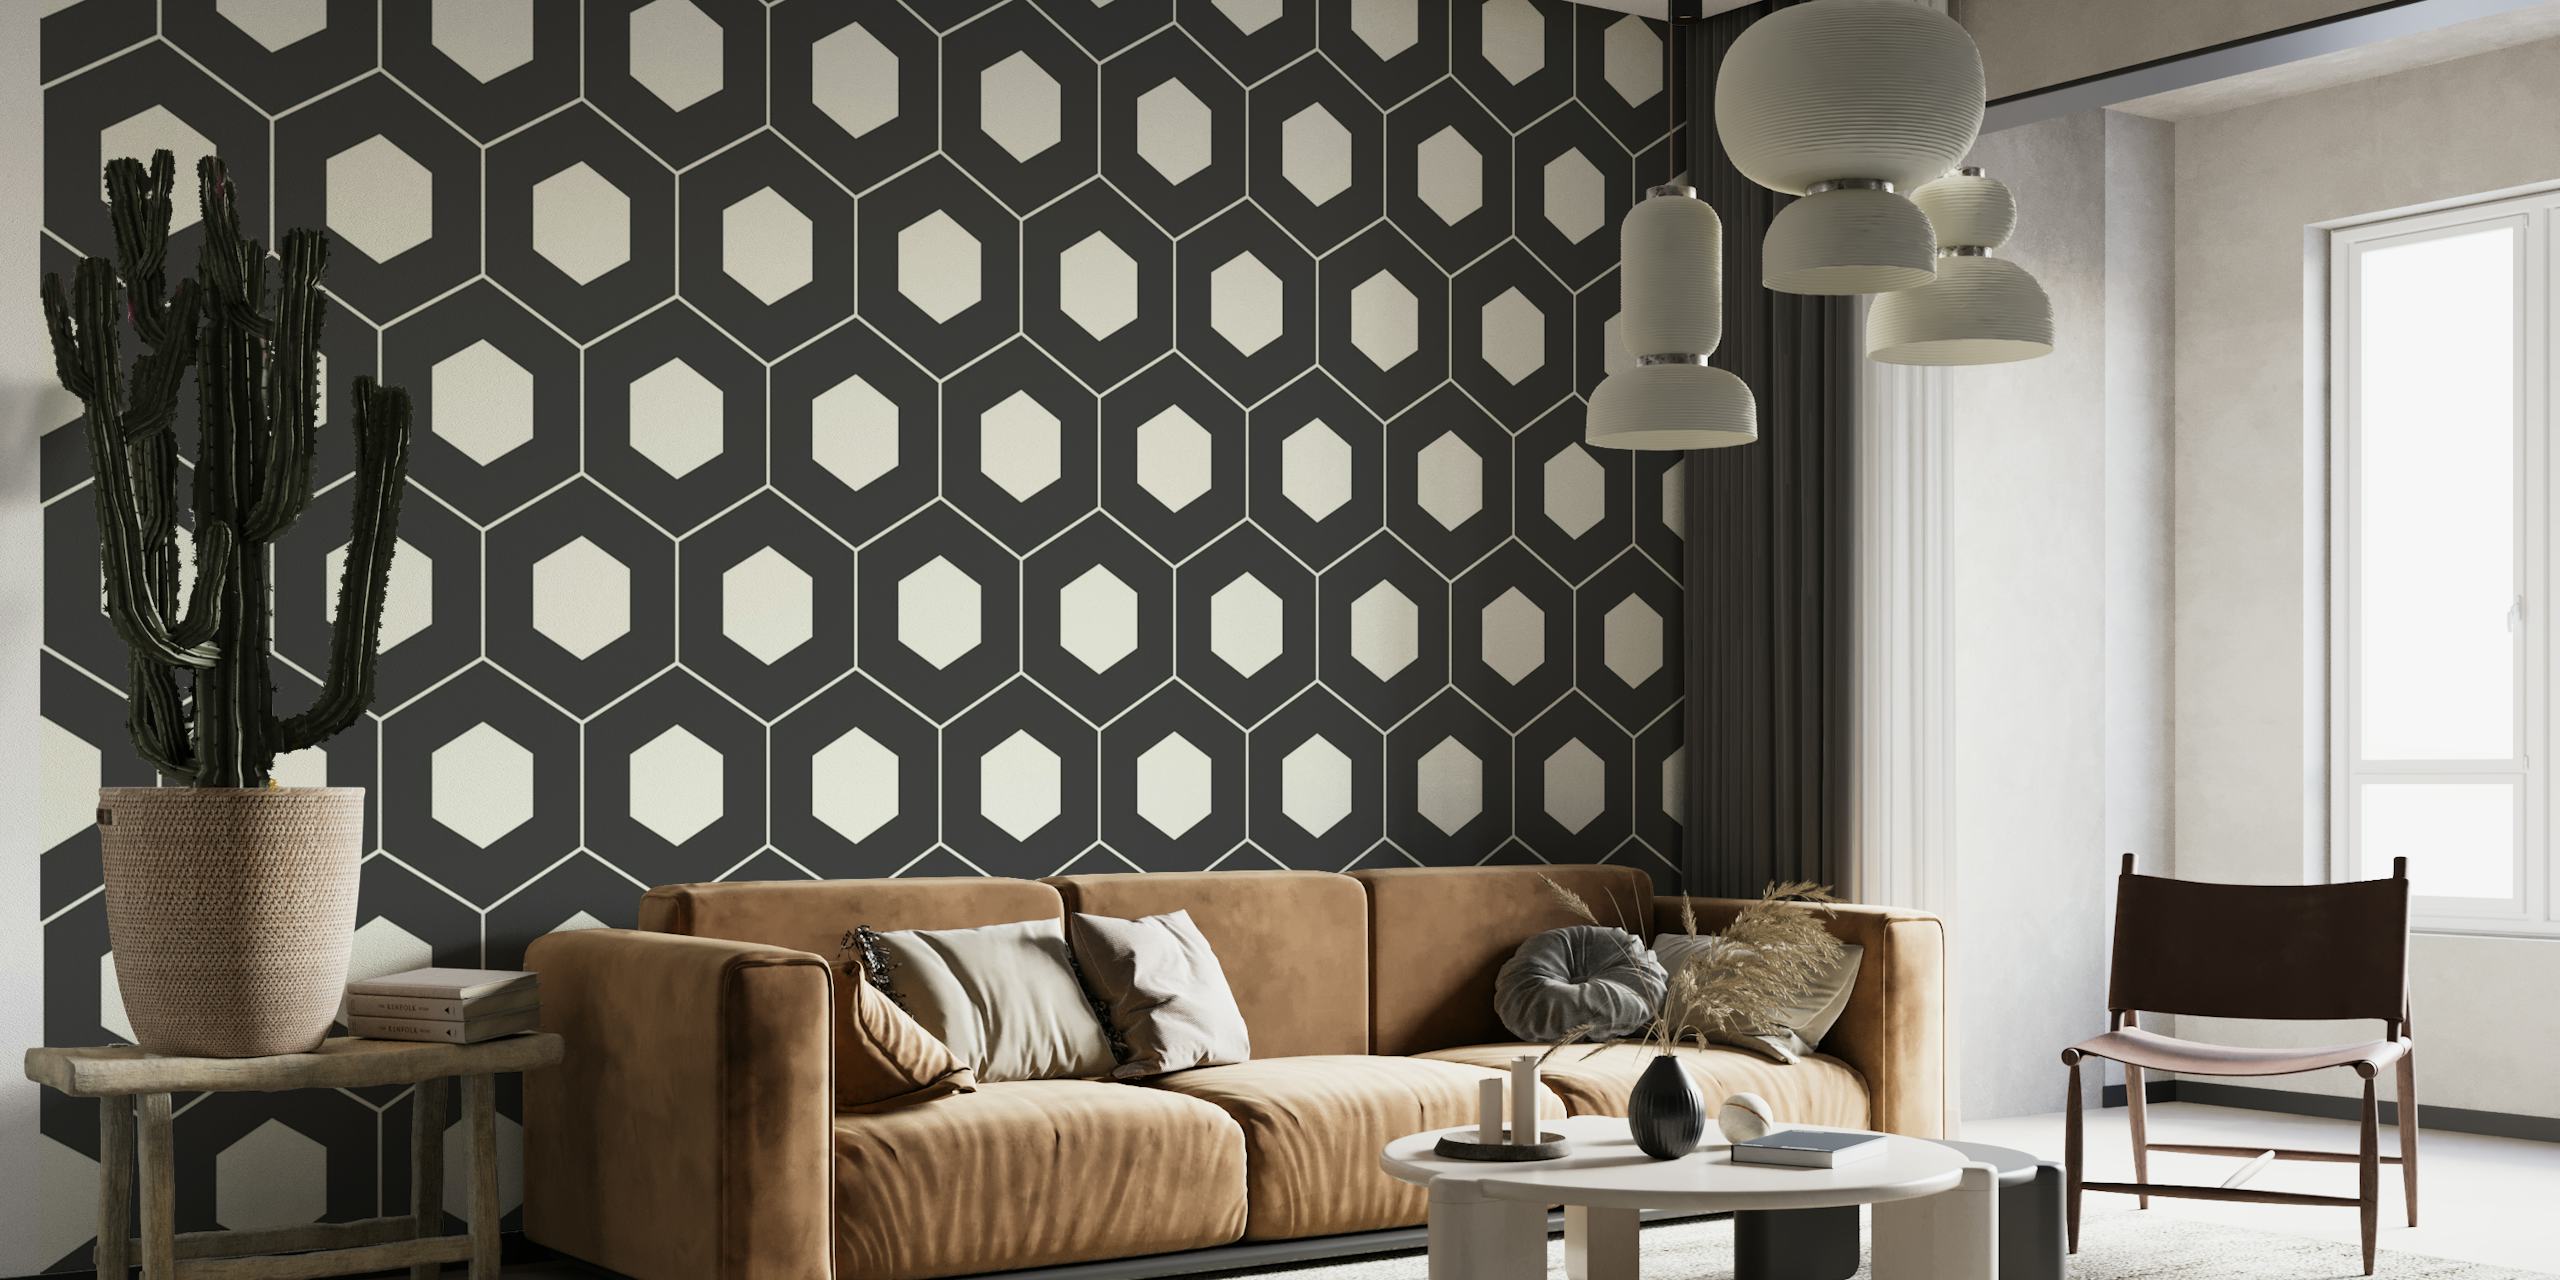 Minimal Vintage Geometry wall mural with repeating black and white geometric pattern